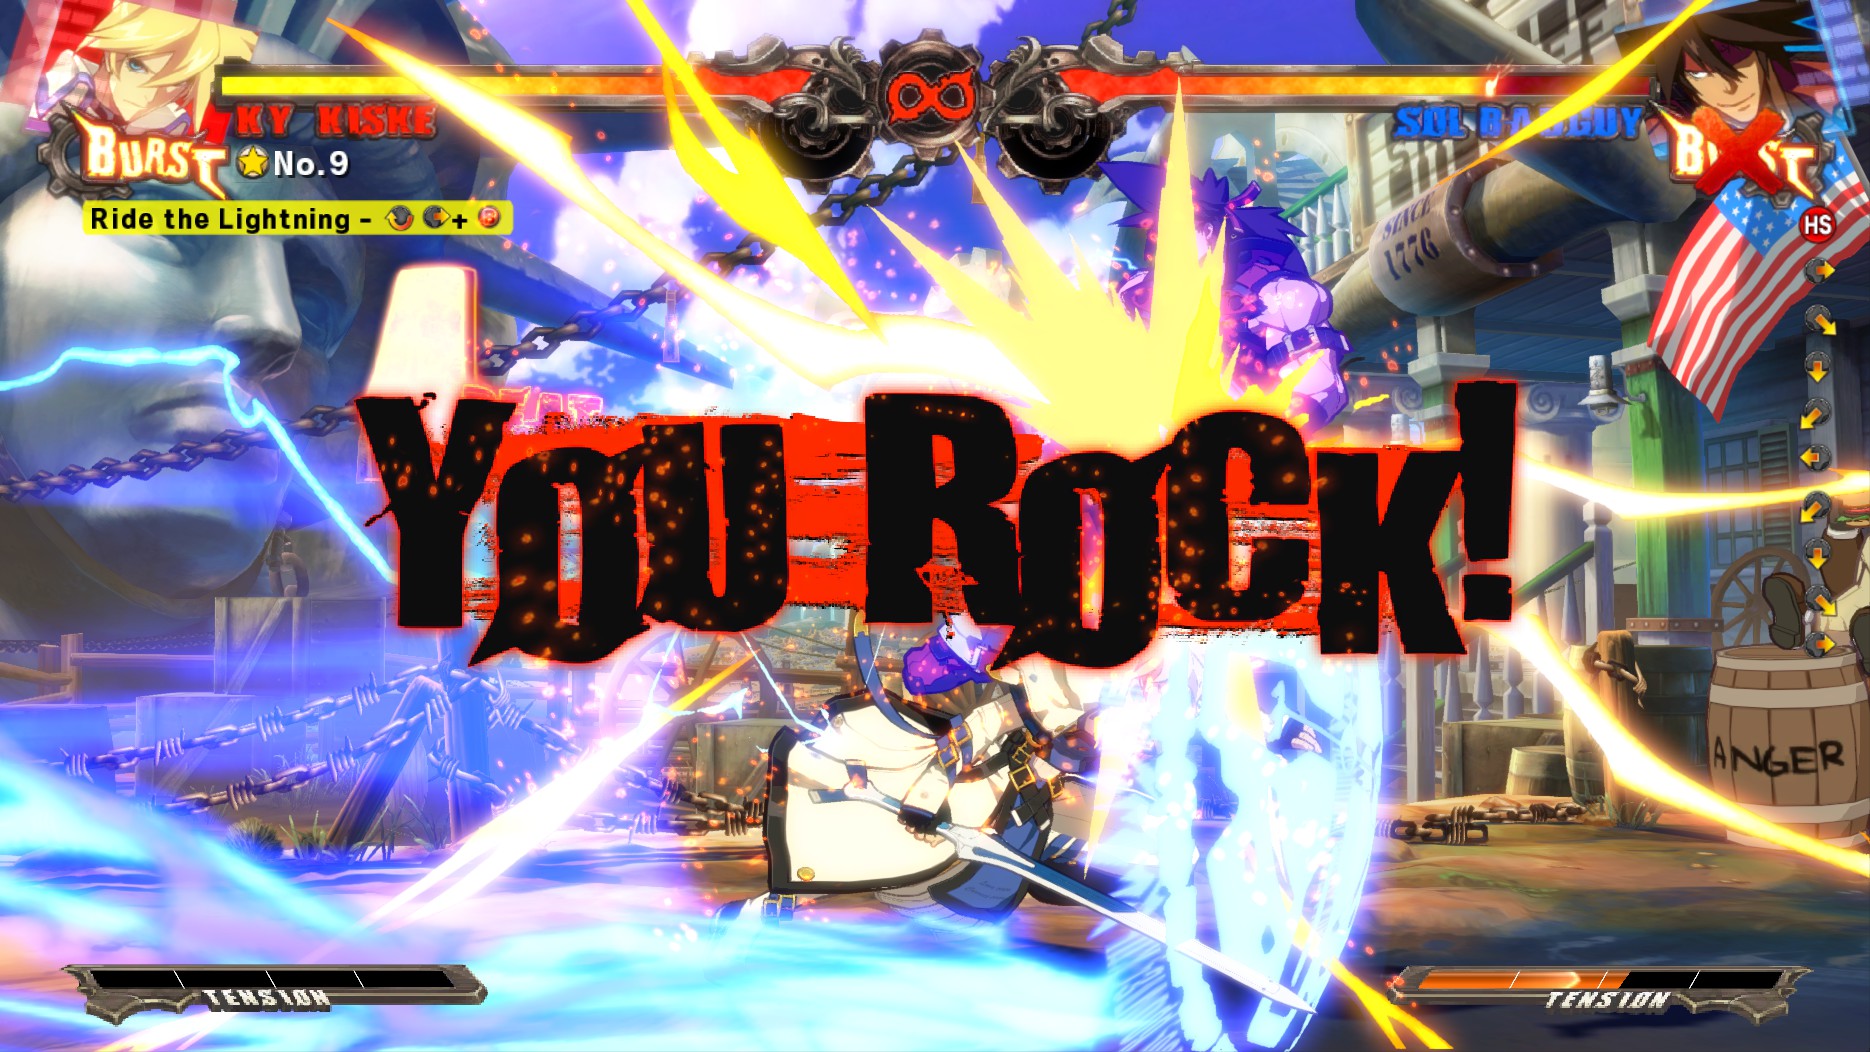 Guilty Gear Xrd: Sign Launching for PC via Steam on December 10